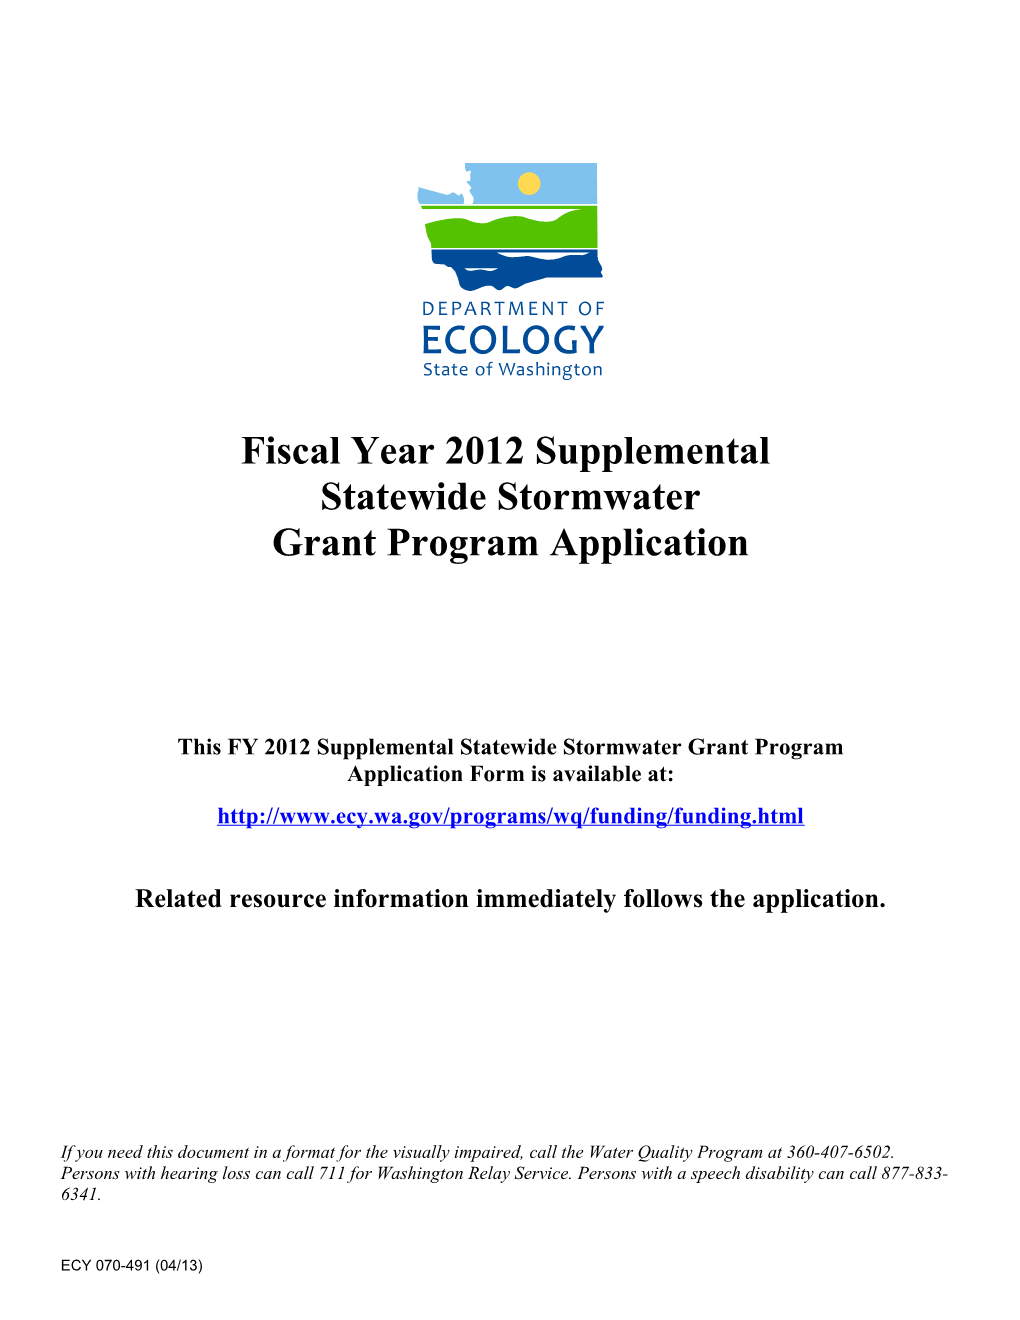 Fiscal Year 2012 Supplemental Statewide Stormwatergrant Program Application